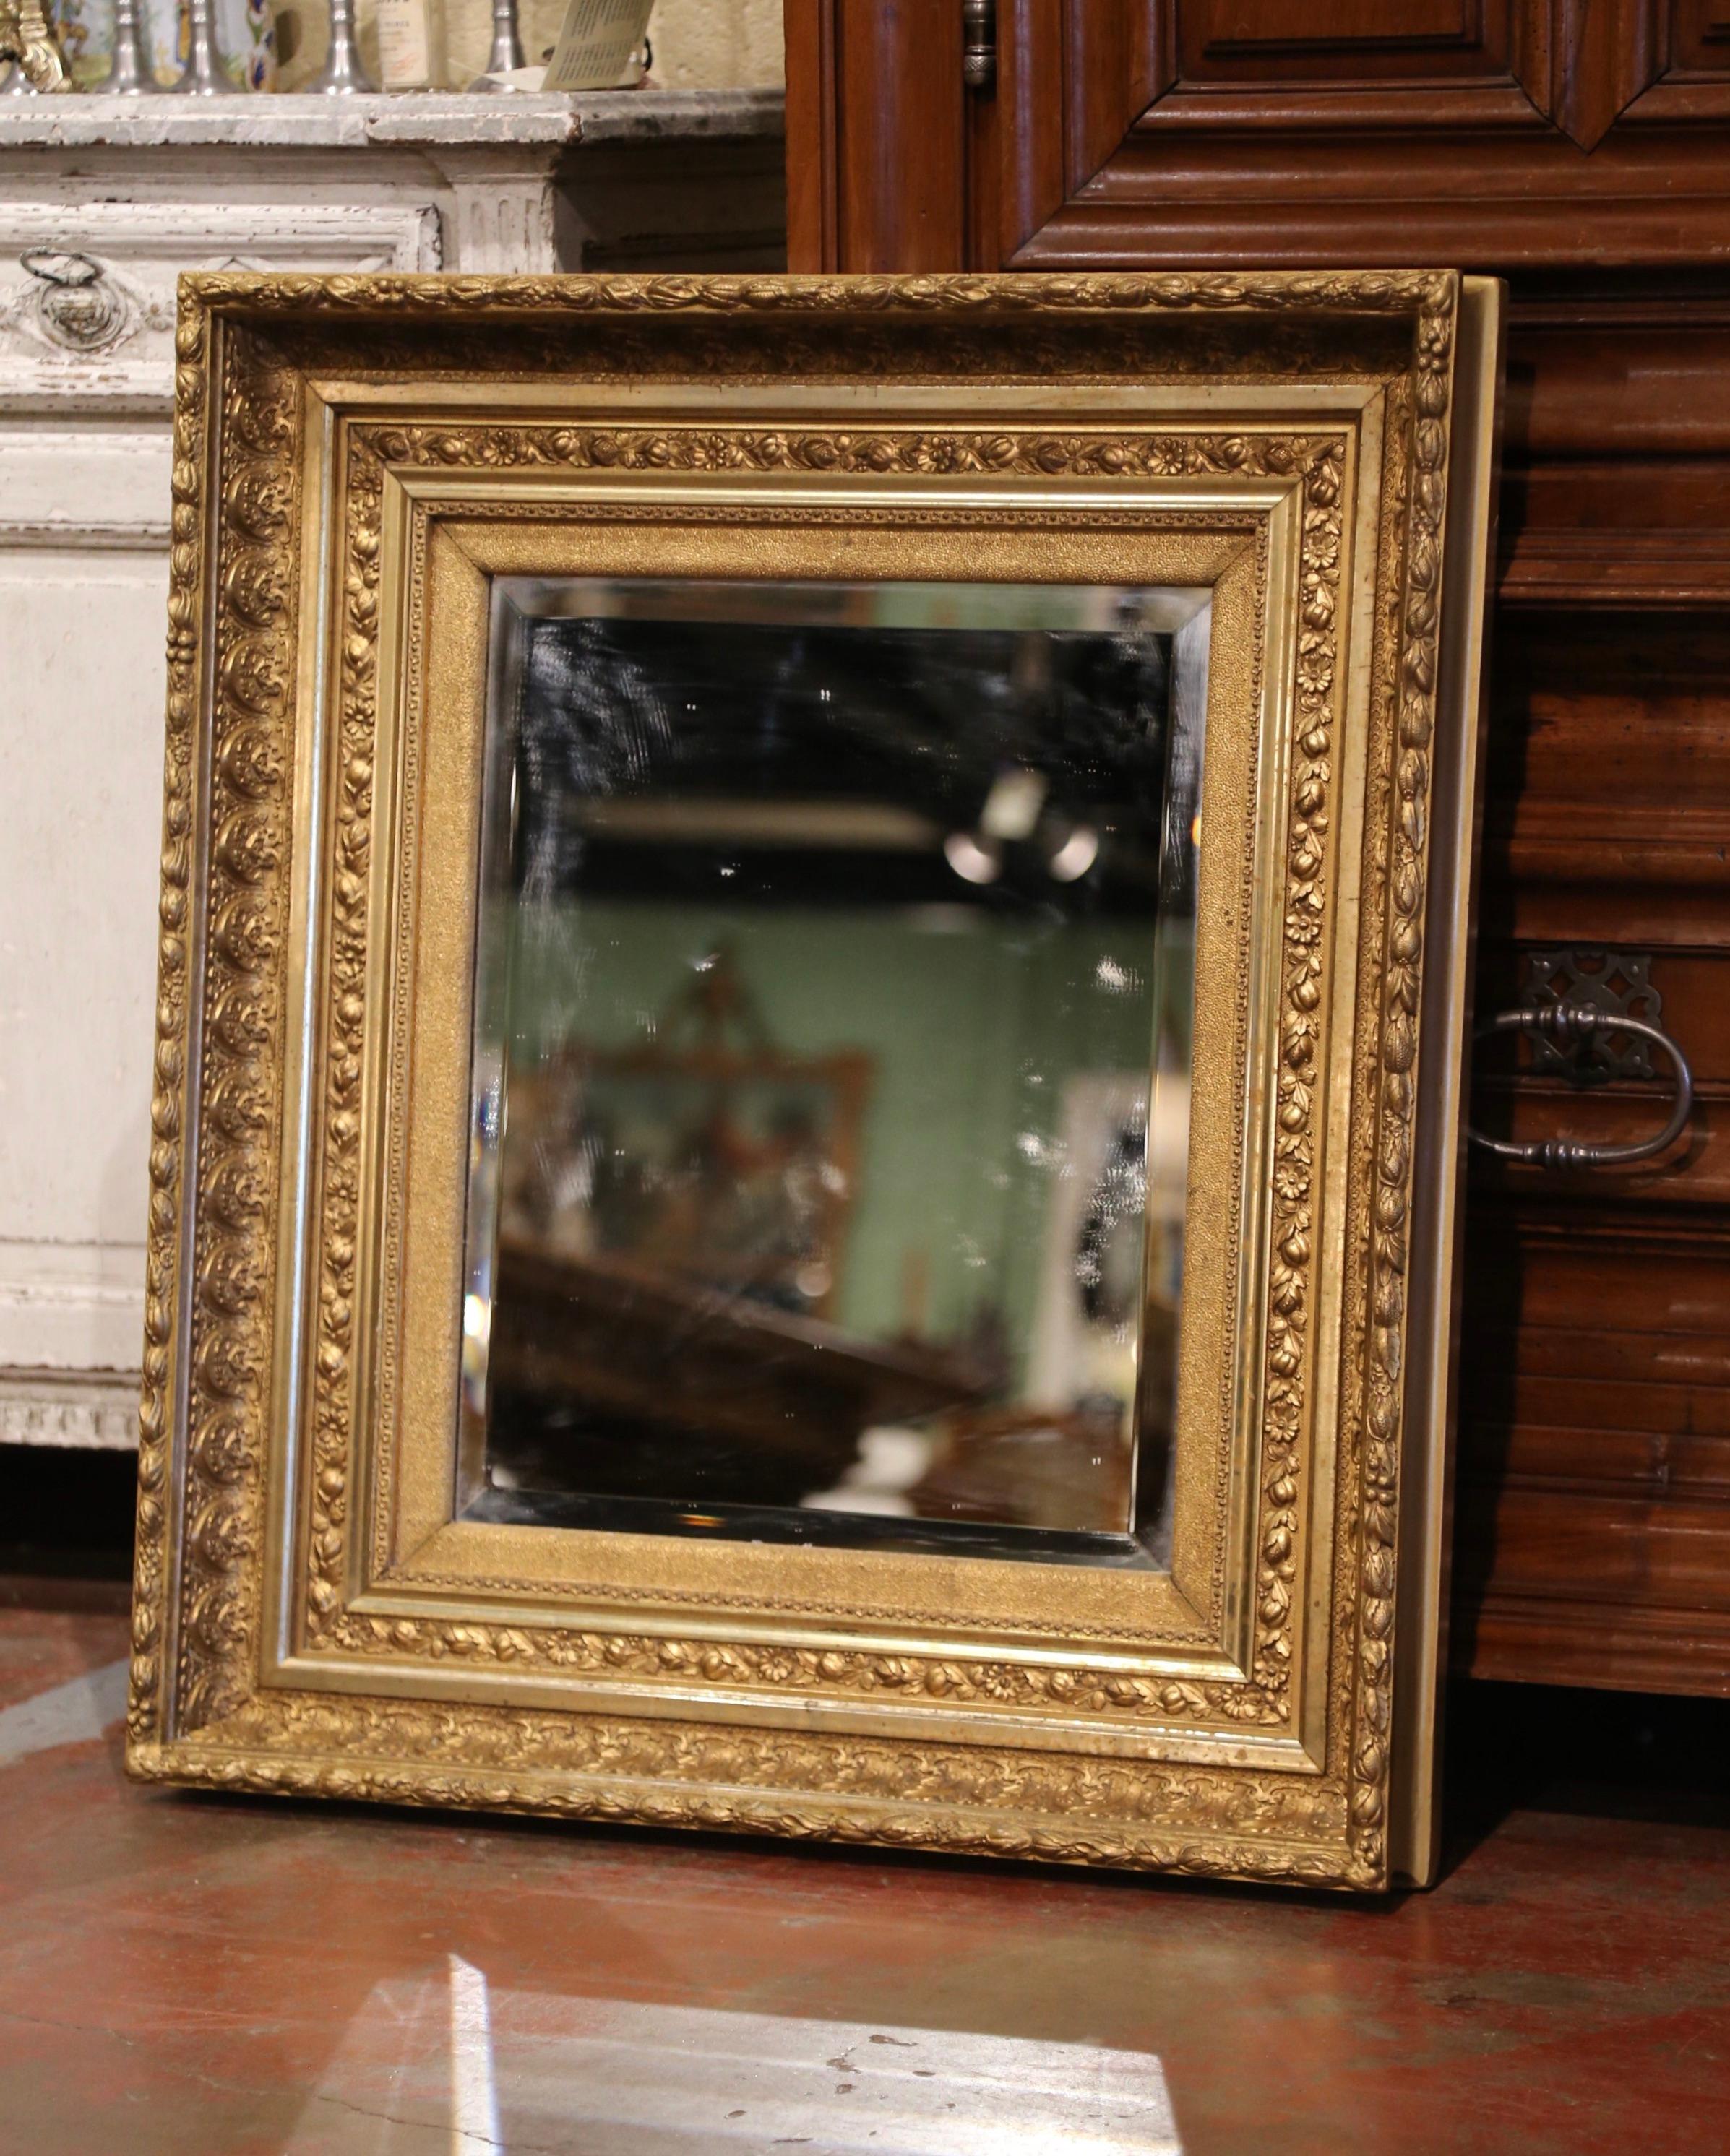 Decorate a powder room, entryway or bedroom with this elegant antique gold leaf mirror. Crafted in the Burgundy region of France, circa 1860, the rectangular mirror has traditional lines decorated with grape, floral, acorn and leaf motifs in high